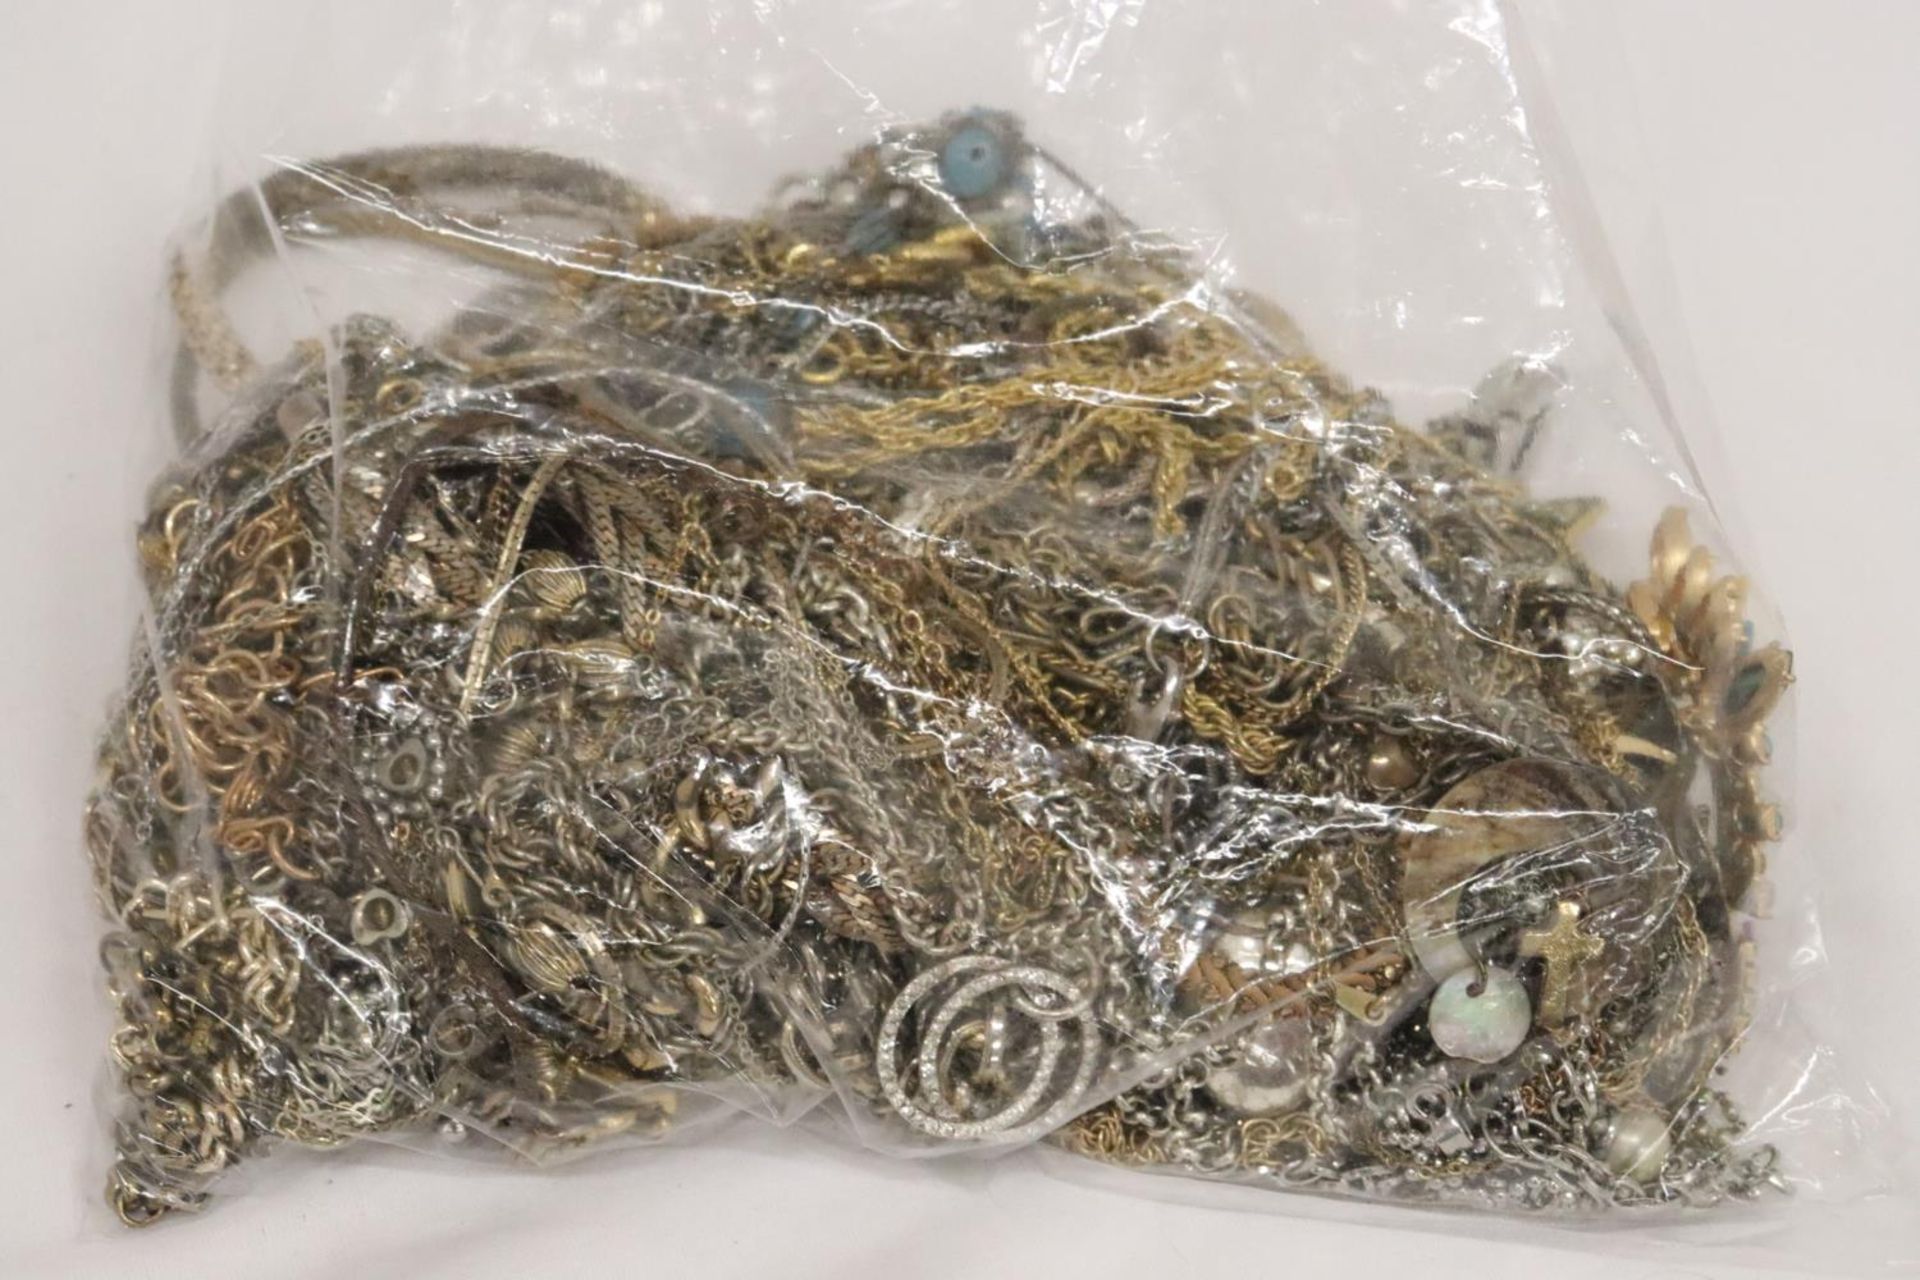 A LARGE QUANTITY OF YELLOW AND WHITE METAL CHAINS ETC - Image 5 of 6